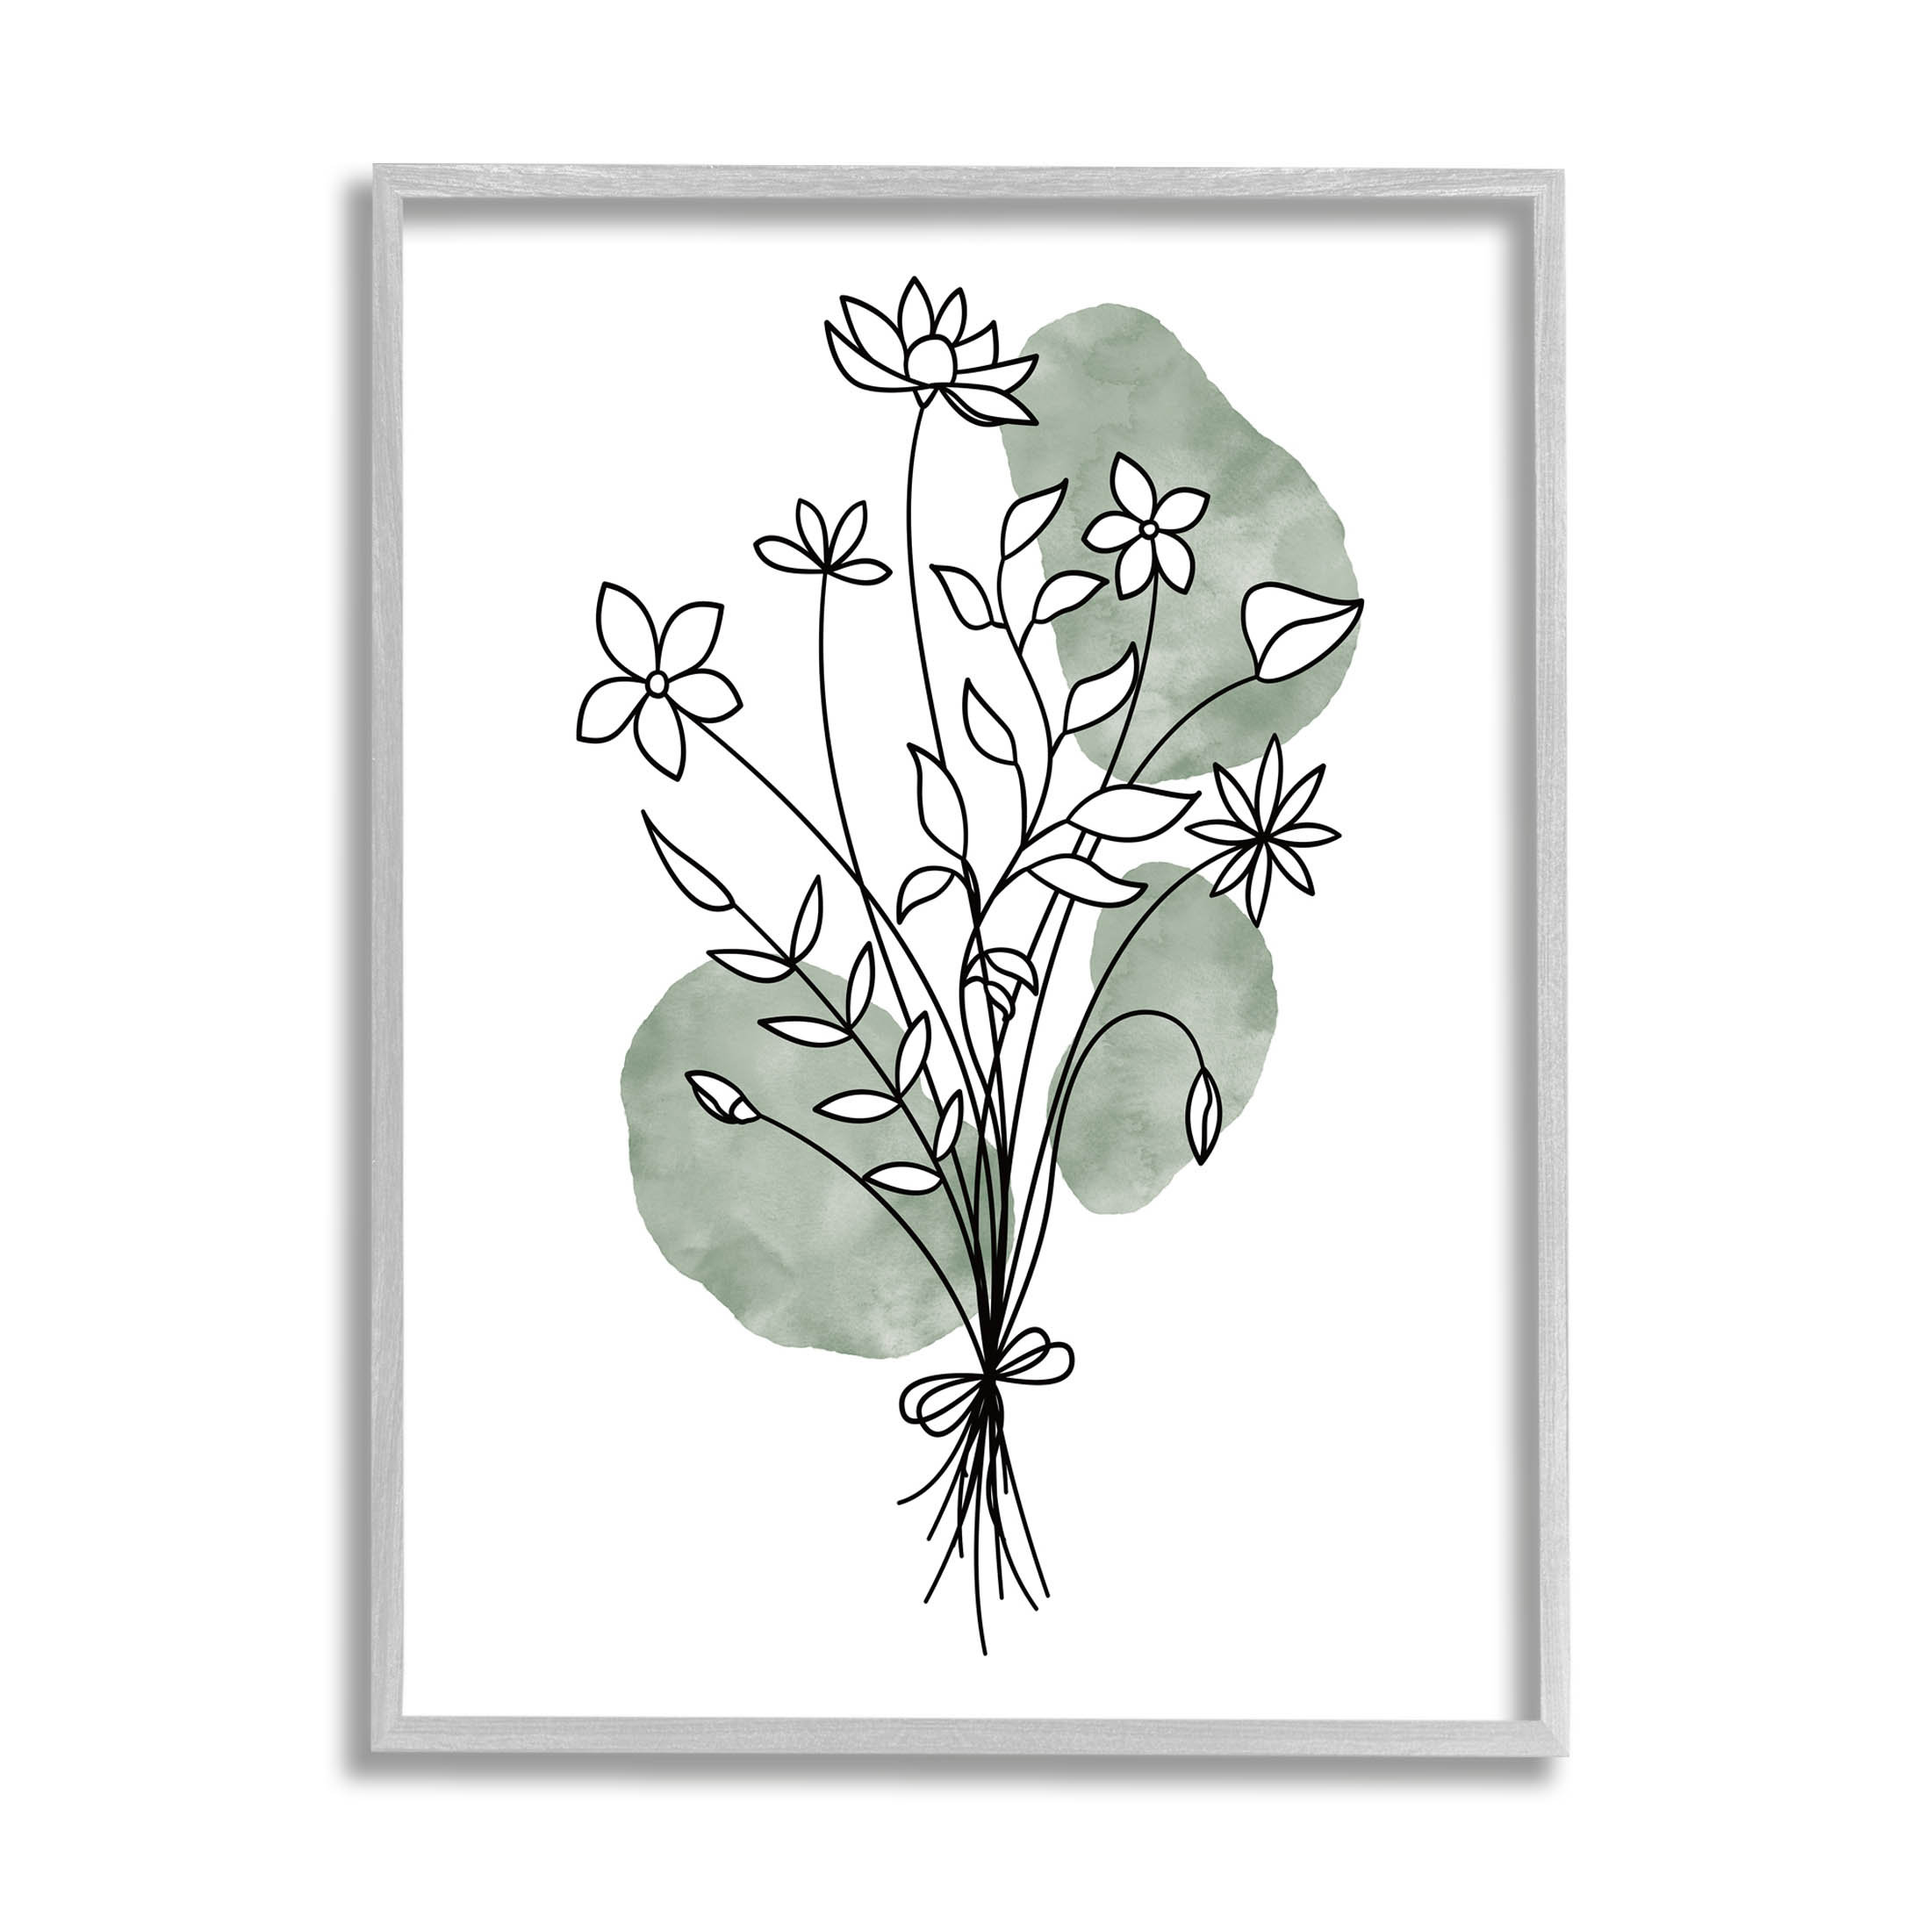 Stupell Industries Daisy Bloom Bouquet Potted Flowers Abstract Pattern White Framed Giclee, 11 x 14